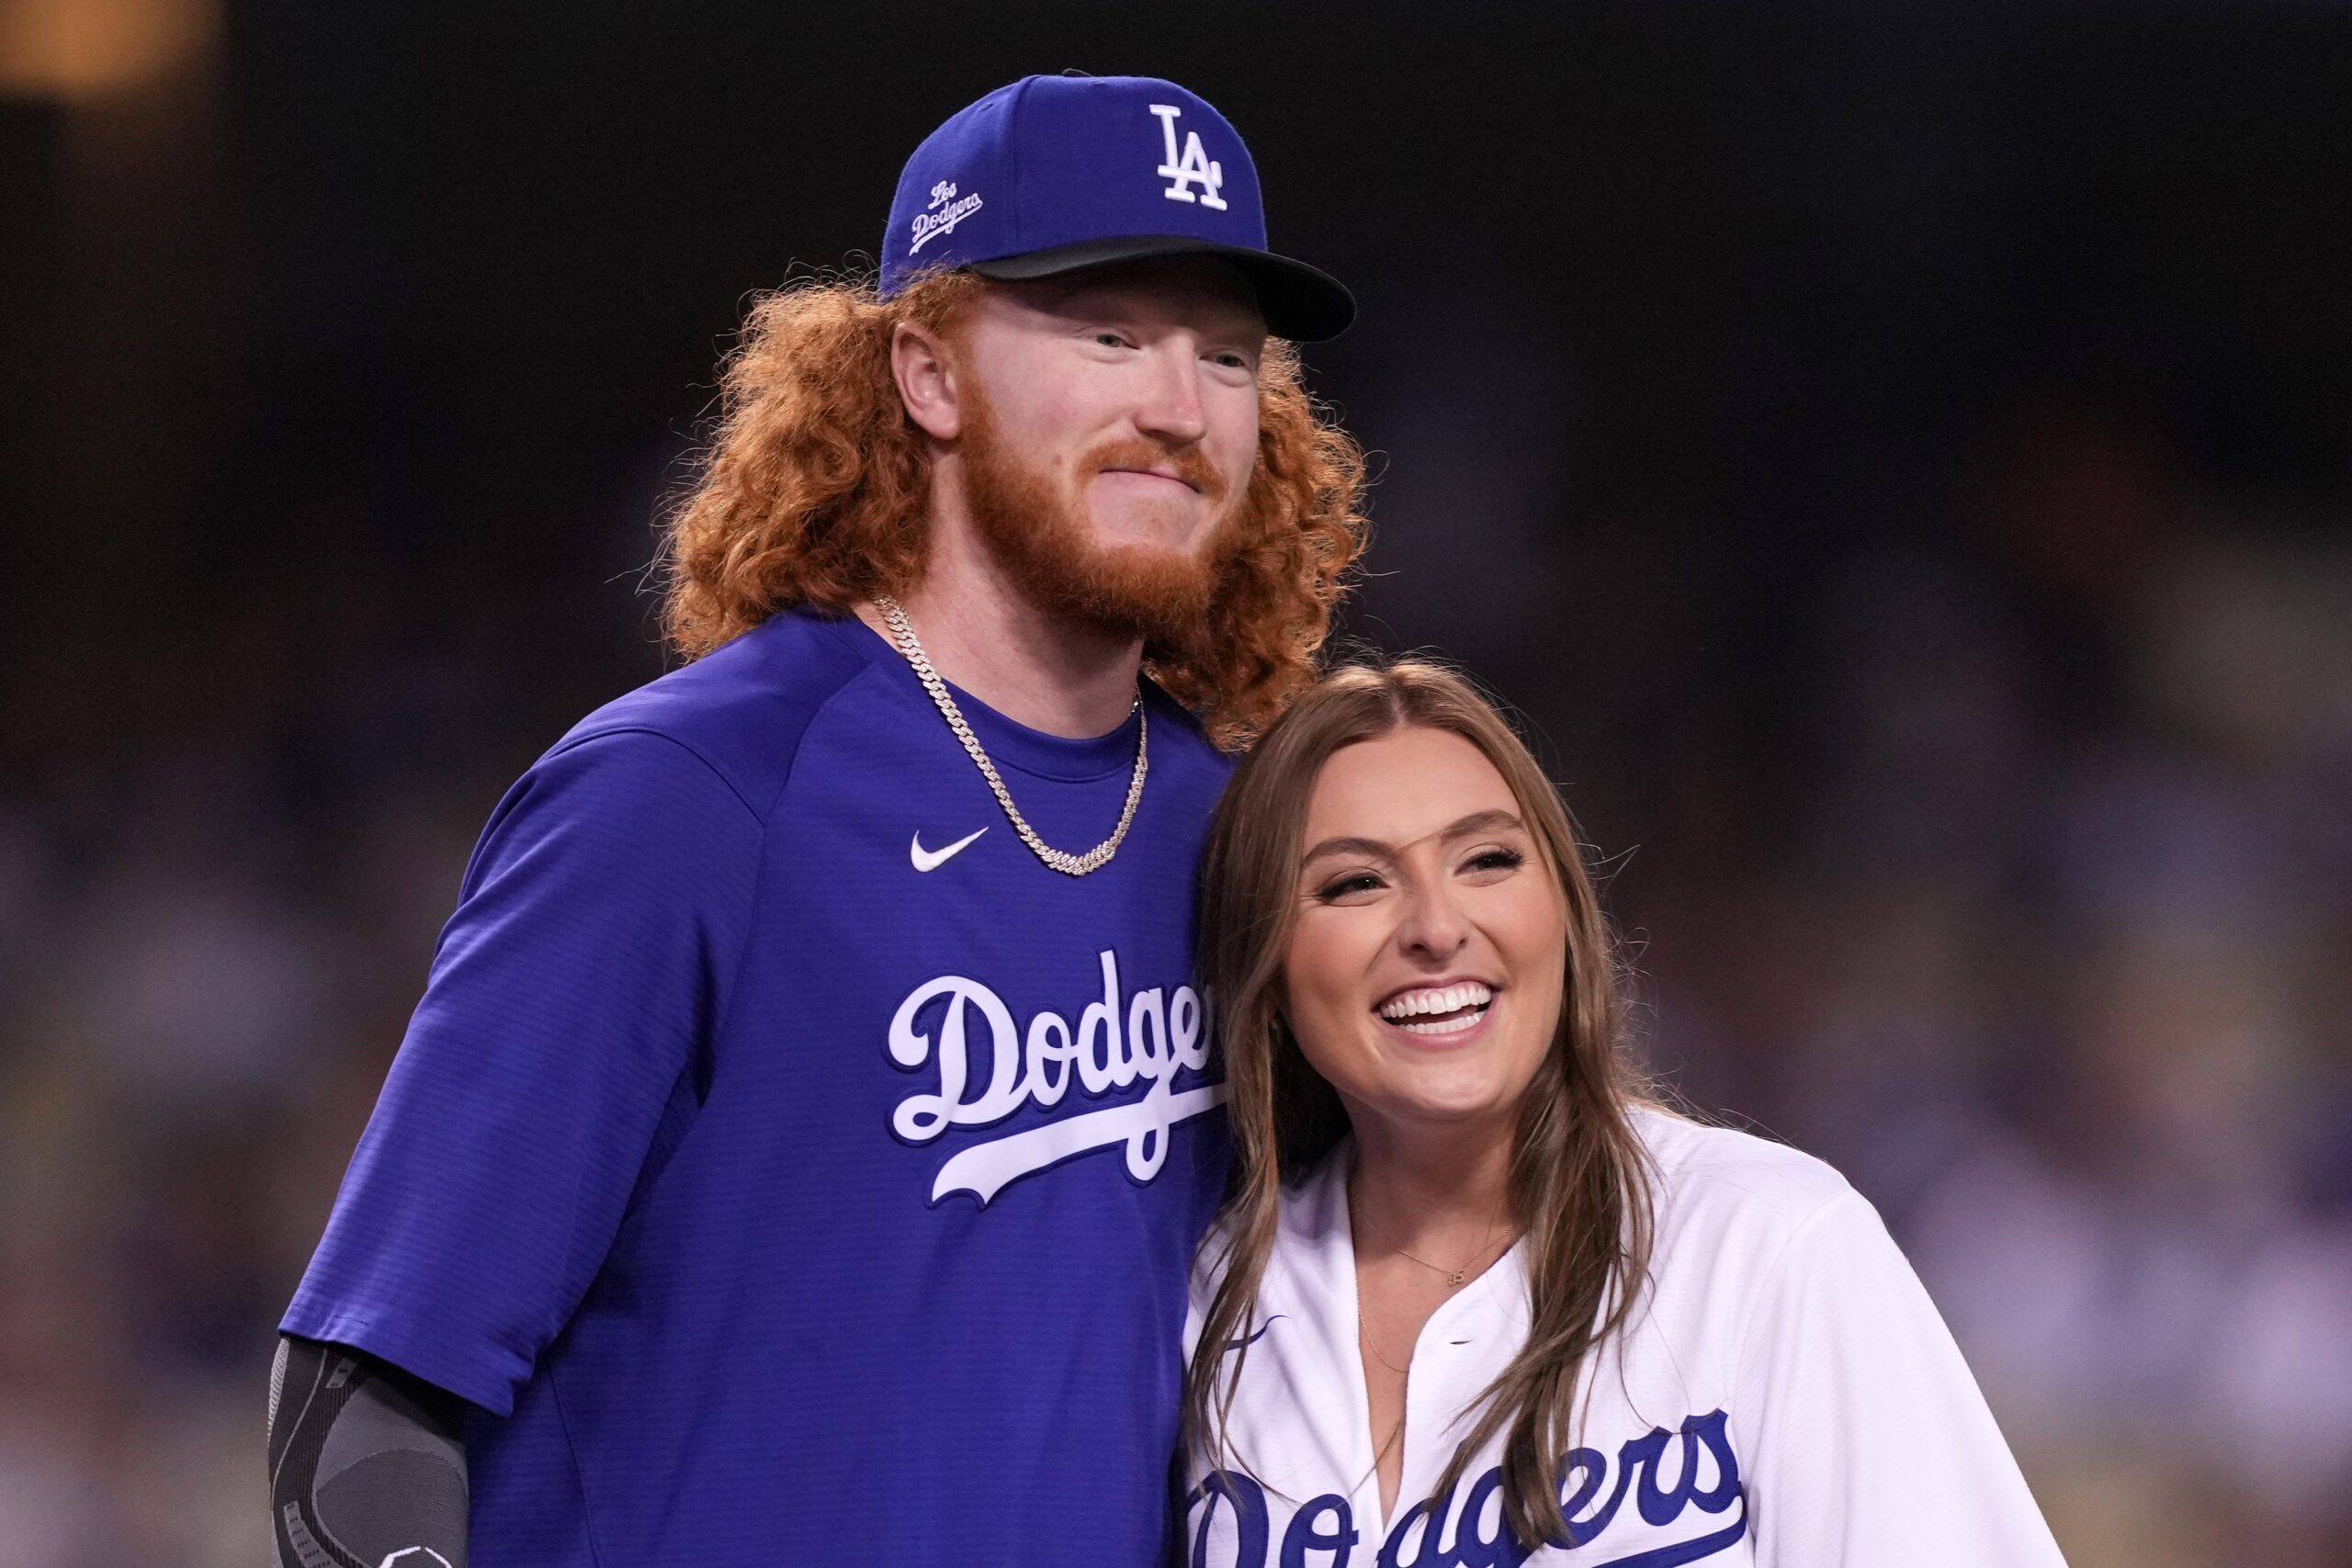 Dodgers News: Millie and Dustin May Tie the Knot